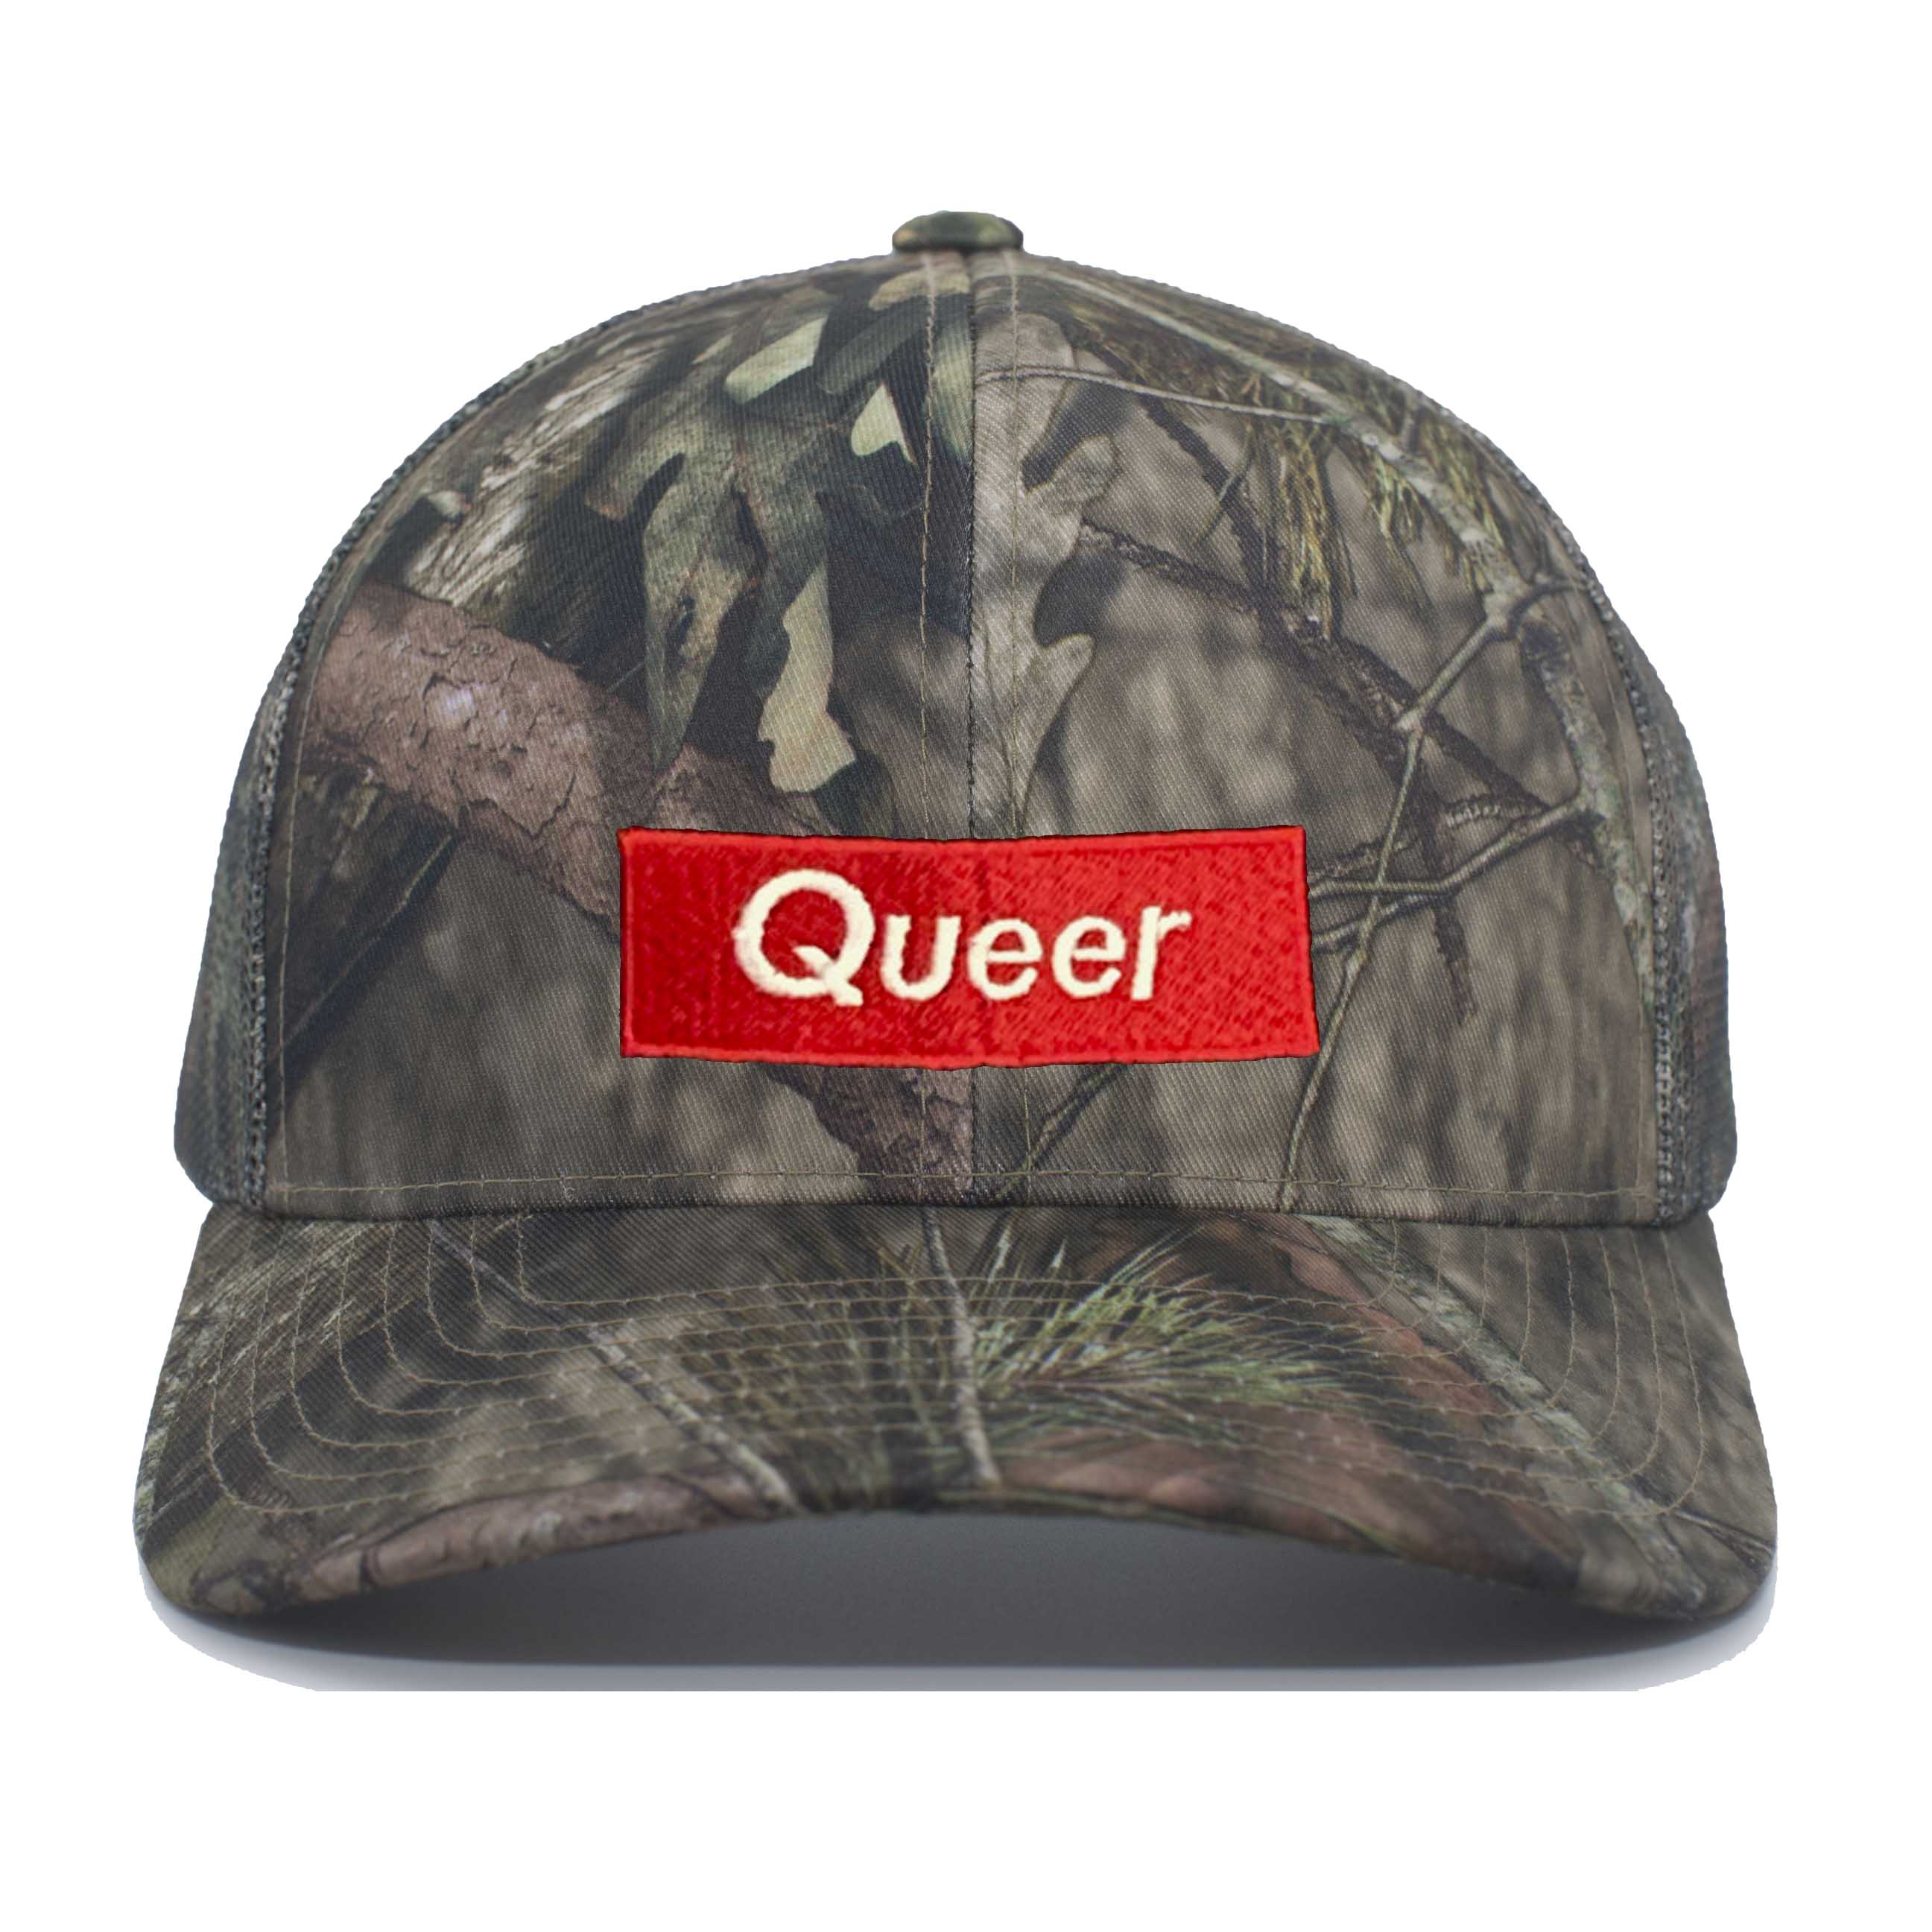 queer red rectangle mossy oak snapback hat